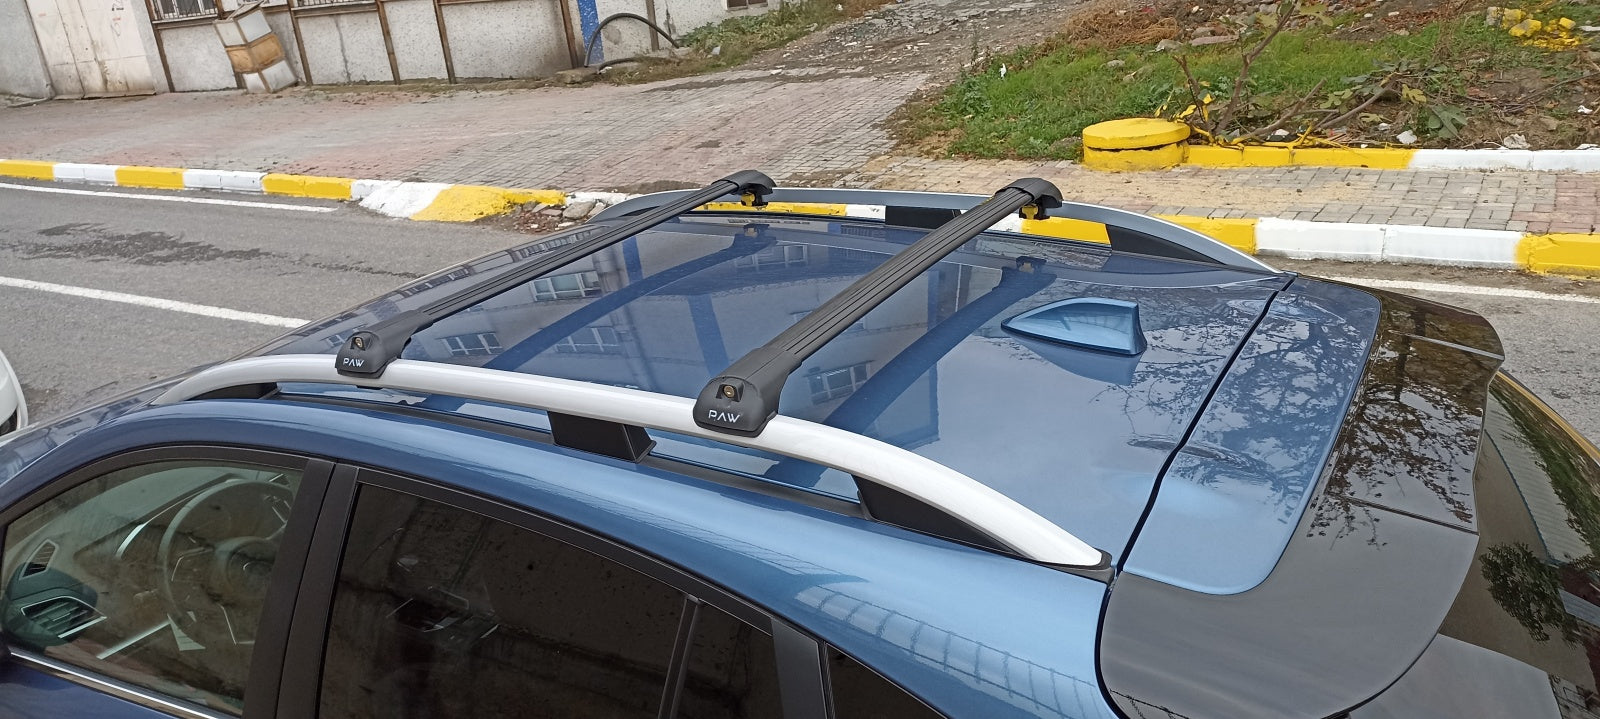 For Mitsubishi Pajero 2007-Up Roof Rack System Carrier Cross Bars Aluminum Lockable High Quality of Metal Bracket Black-4